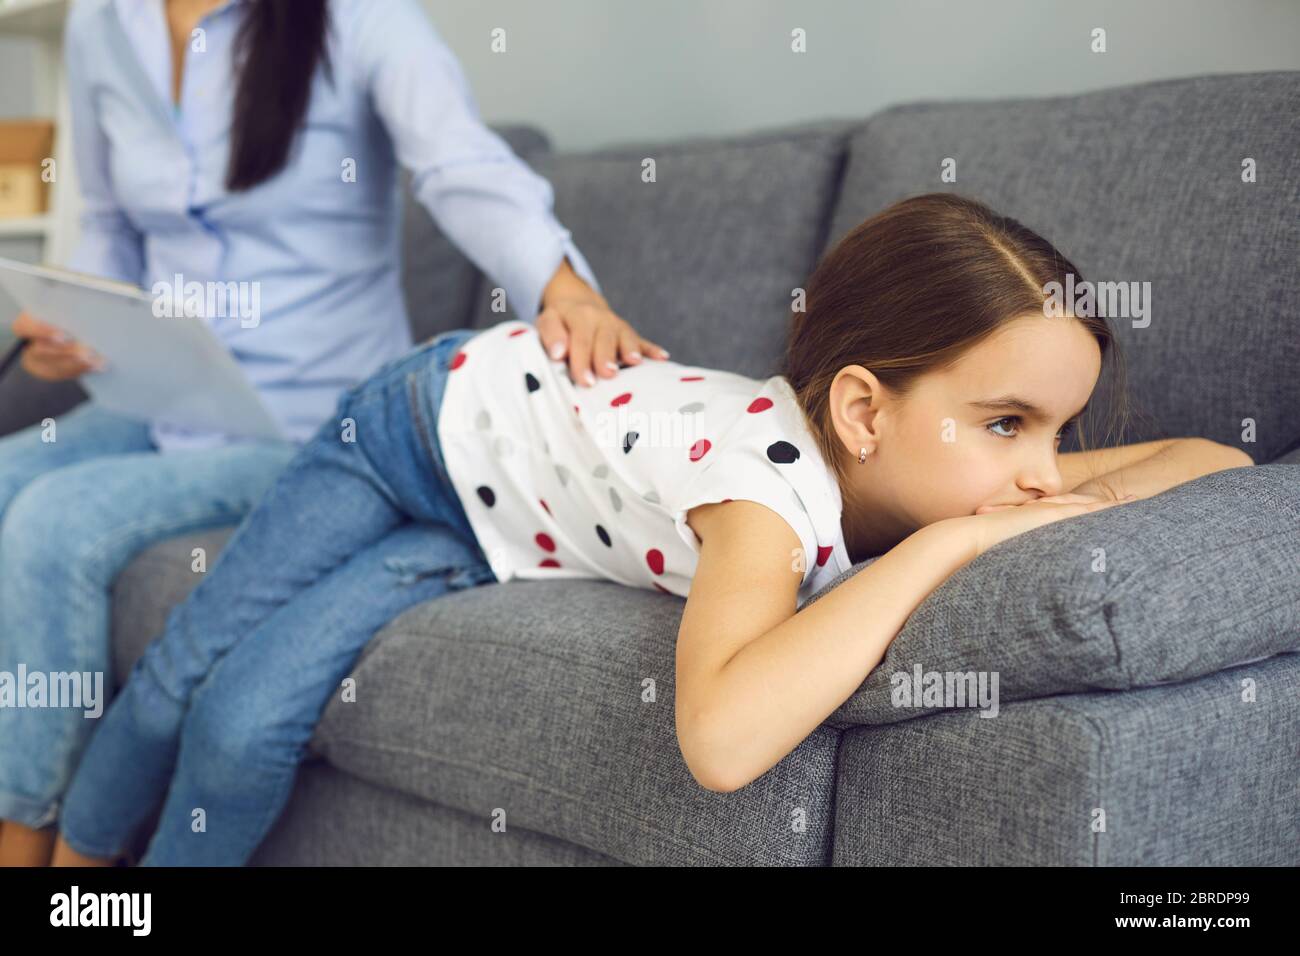 Child psychologist psychology. Woman psychologist with a clipboard helps a child with a problem in the room. Doctor psychologist reassures the patient Stock Photo